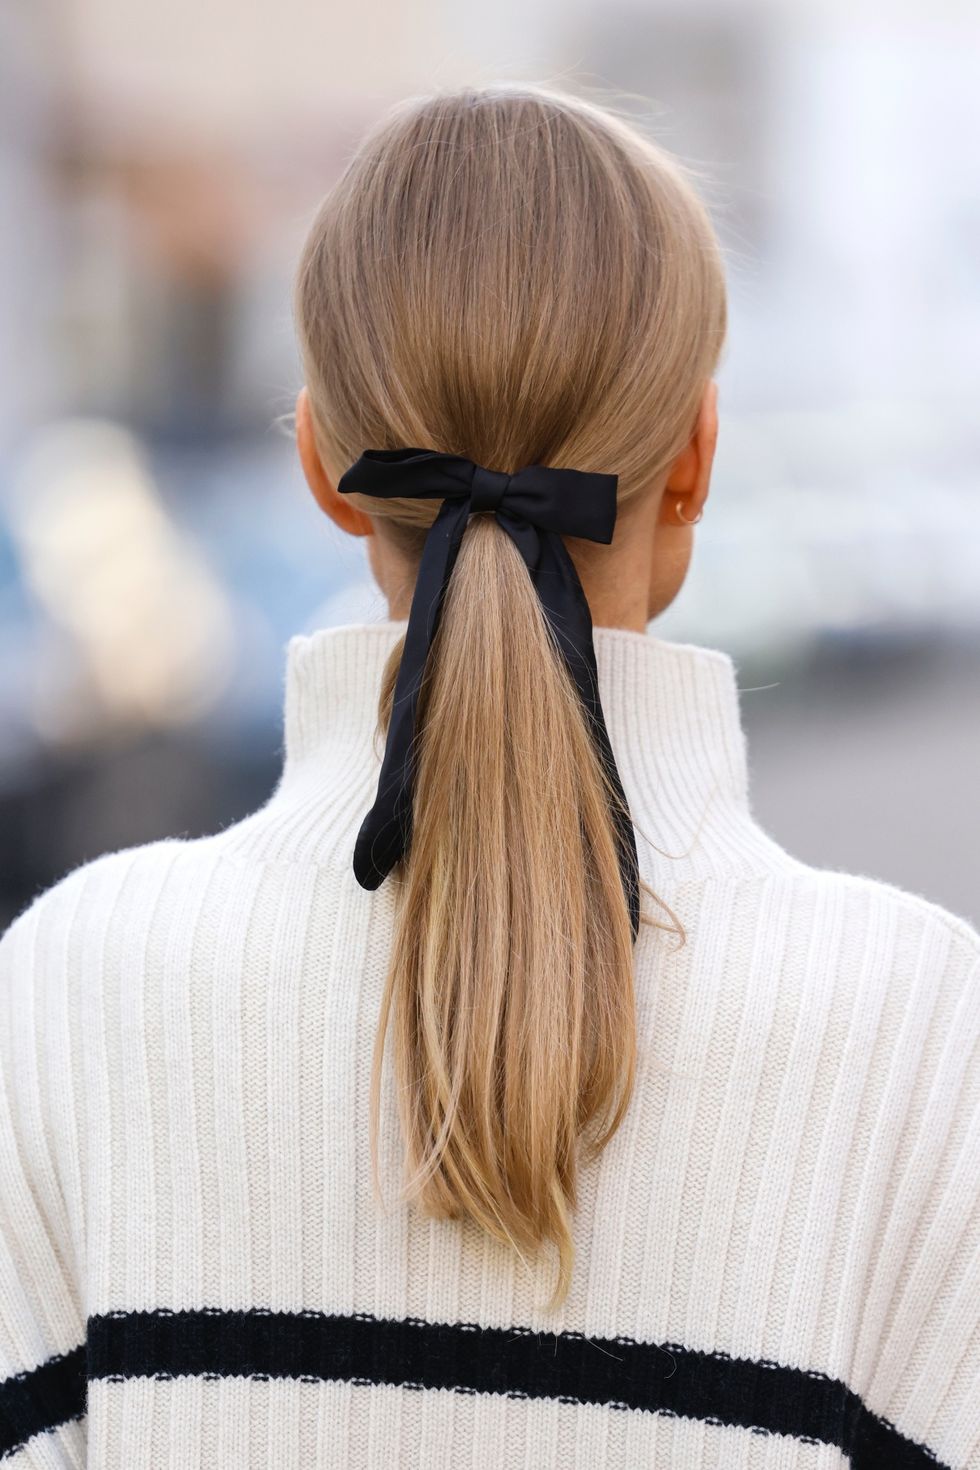 munich, germany   january 27 influencer and model marlies pia pfeifhofer wearing a white knitted turtleneck pullover with black stripes by hm, symbol sunglasses by prada and a black hair tie with bow during a street style shooting on january 27, 2022 in munich, germany photo by streetstyleshootersgetty images